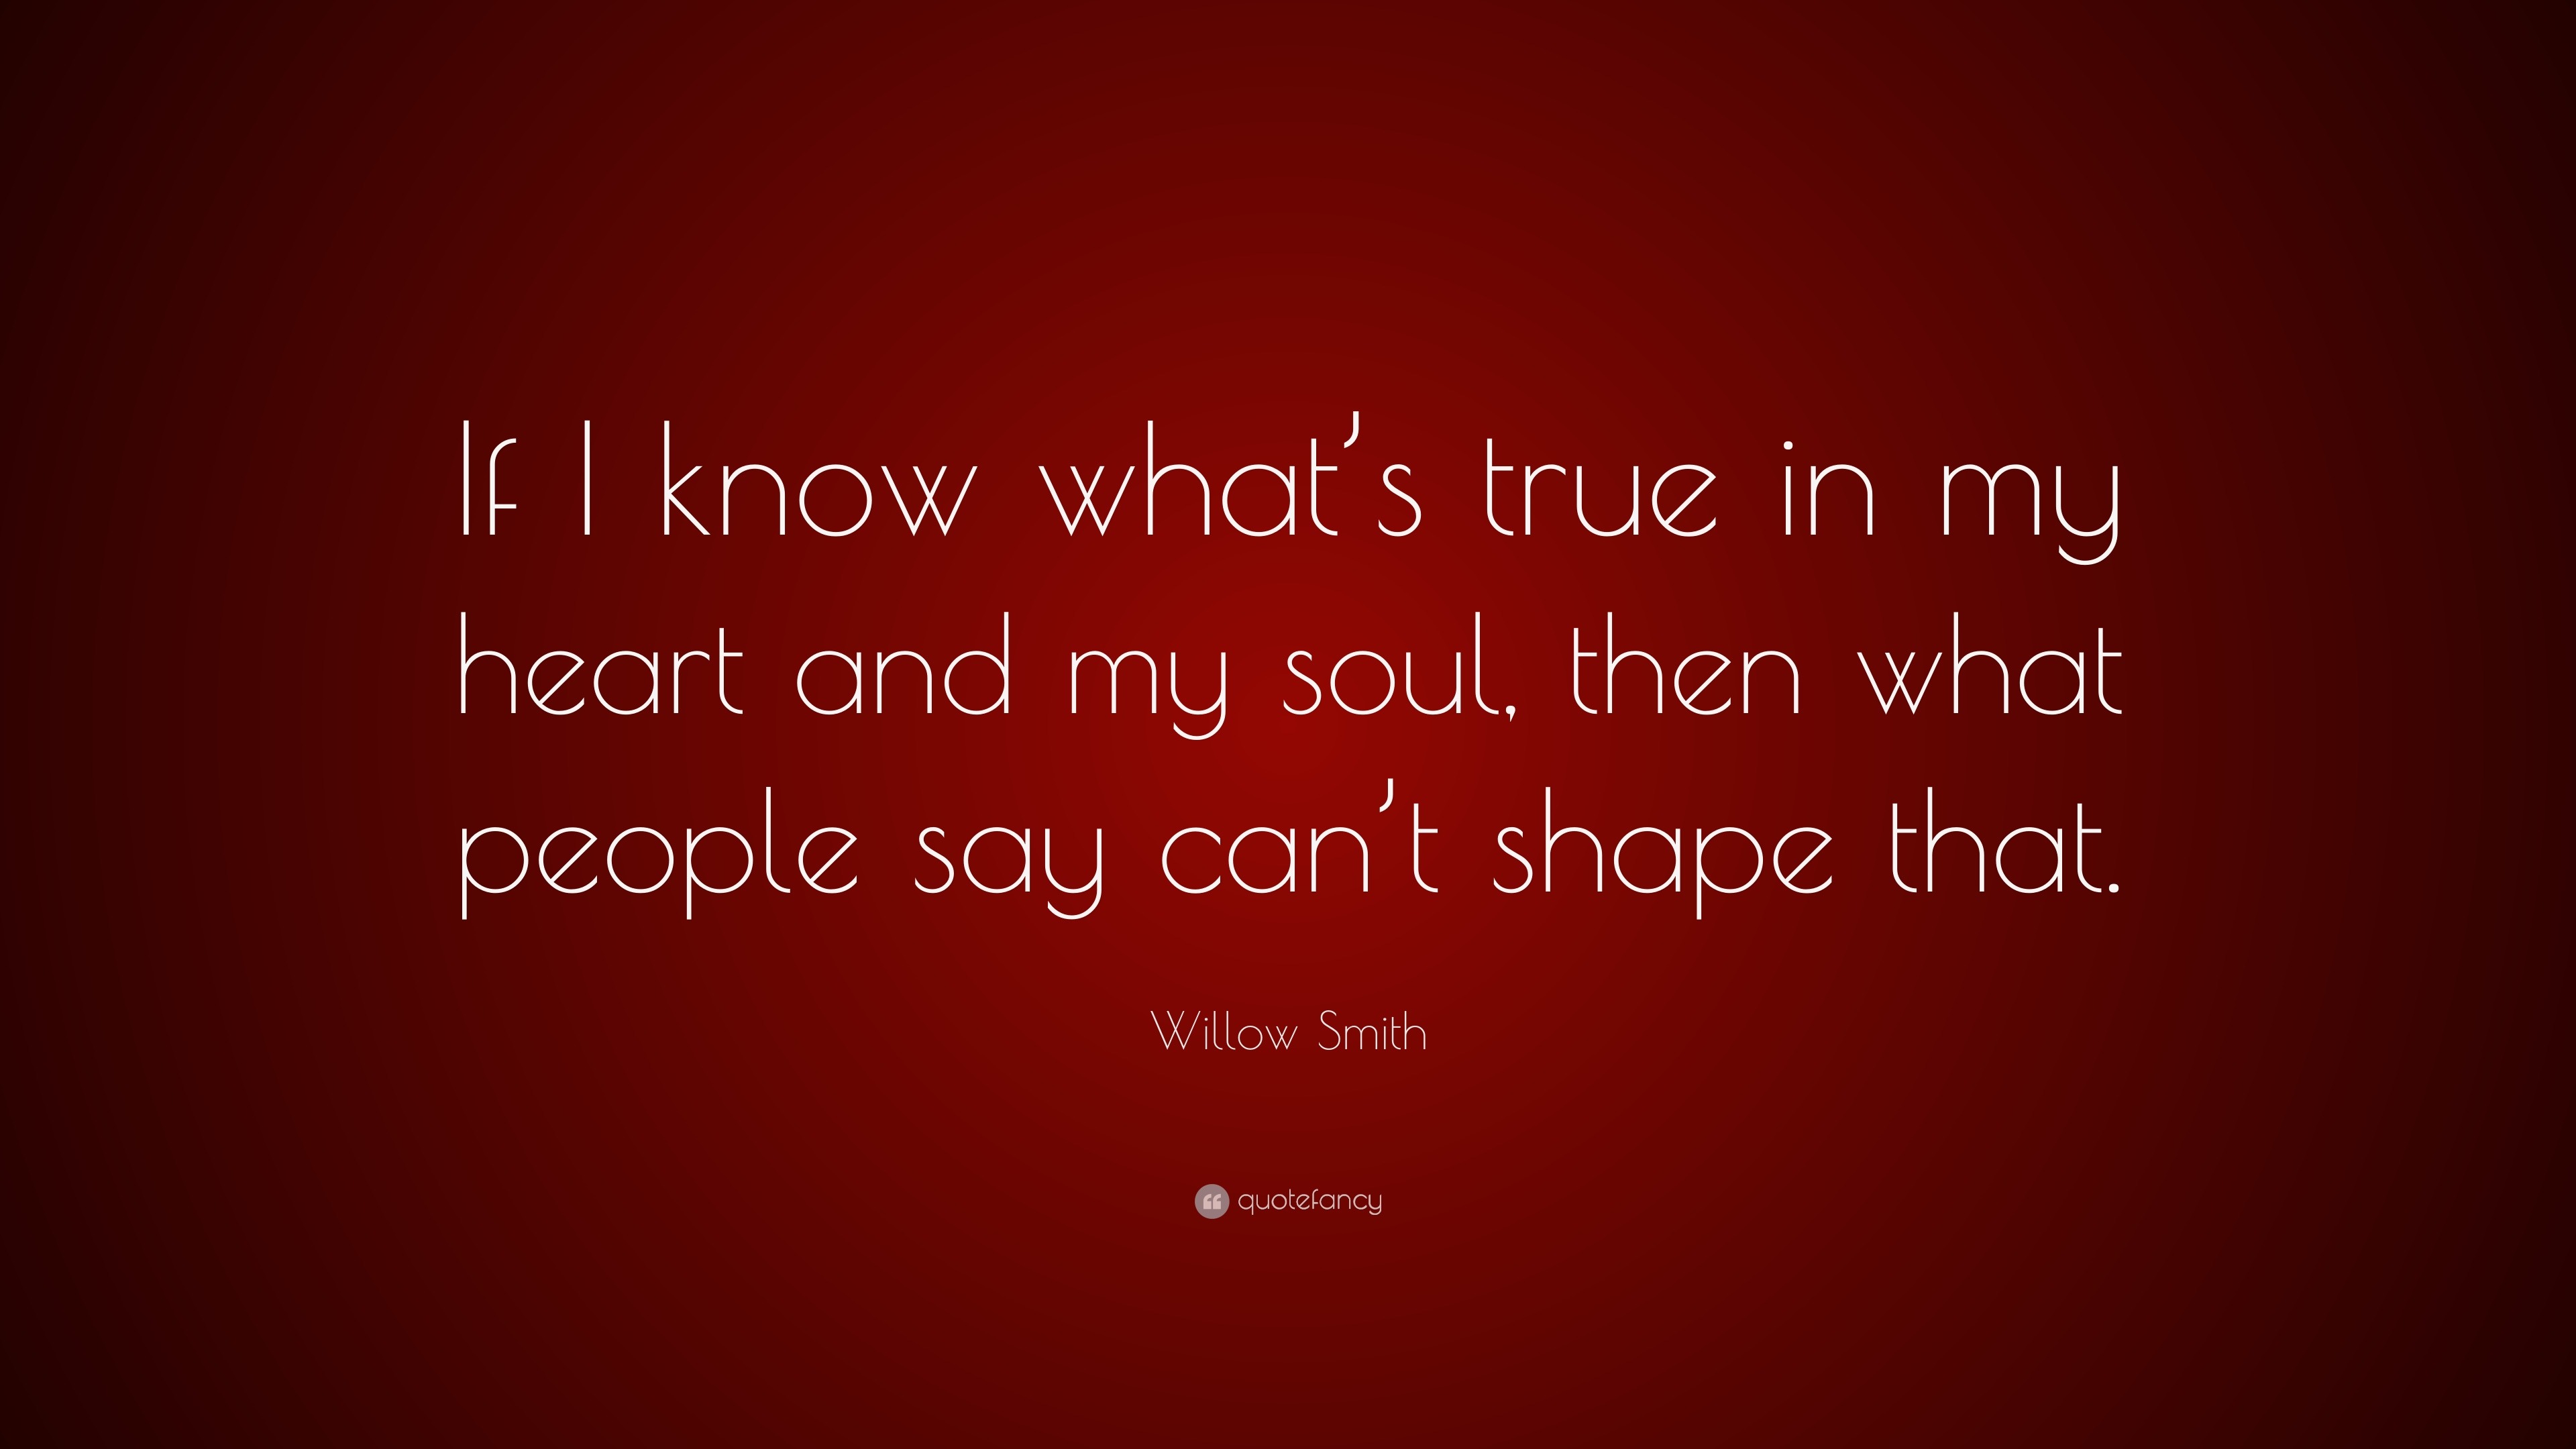 Willow Smith Quote: "If I know what's true in my heart and my soul, then what people say can't ...